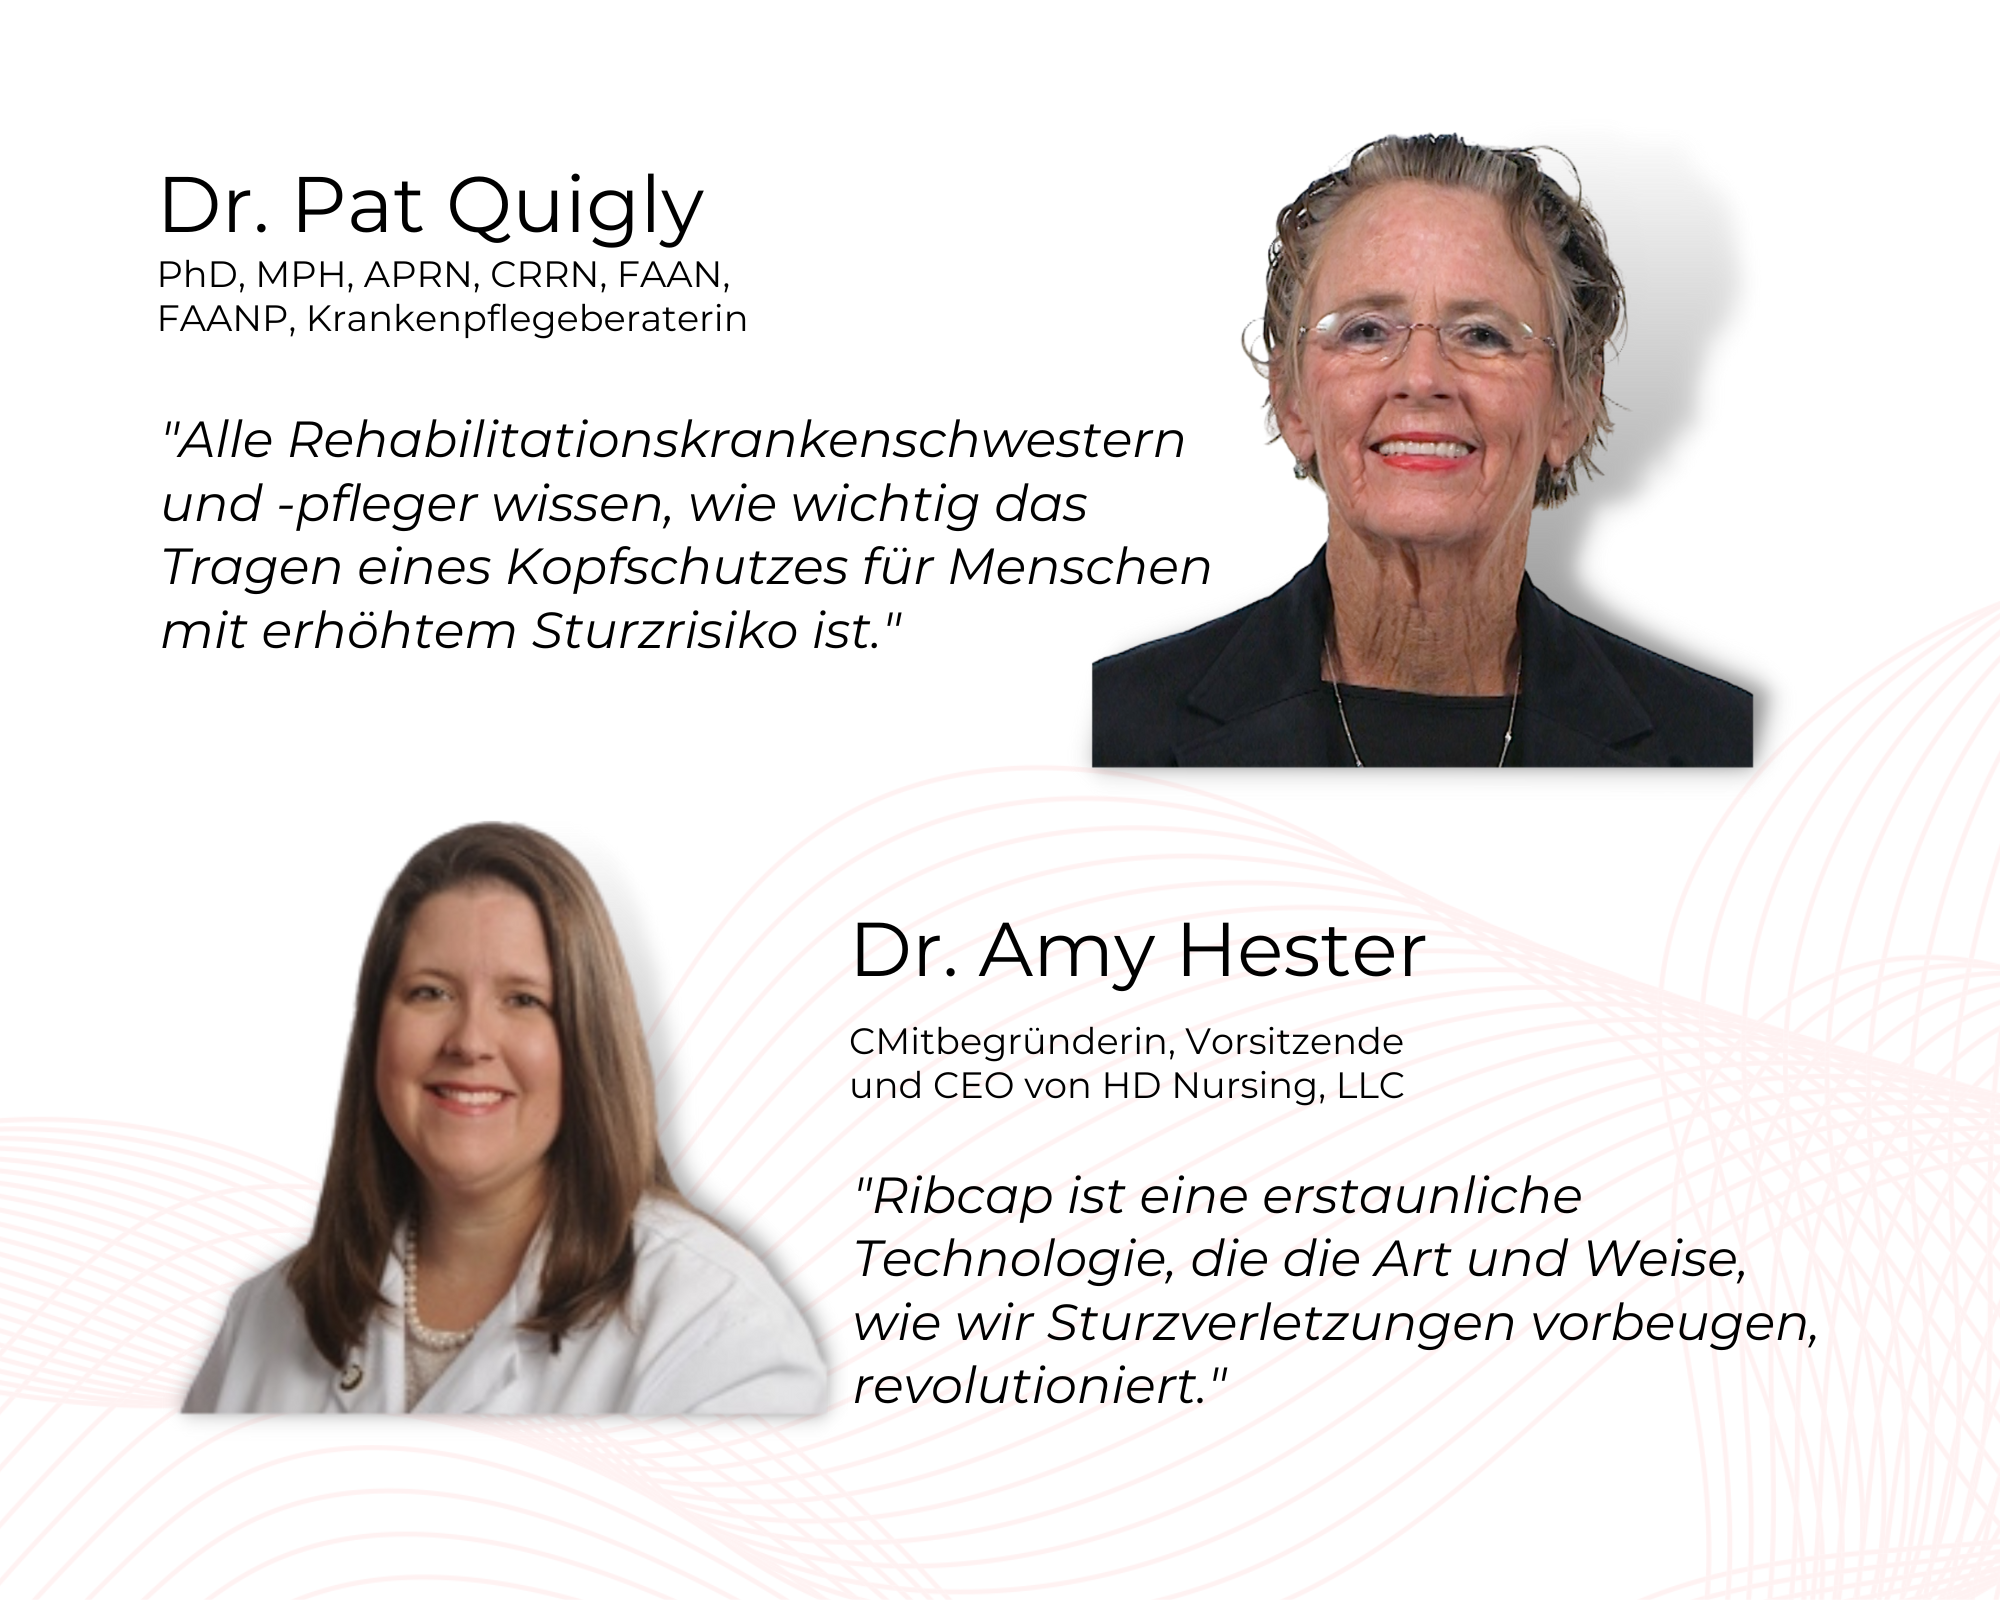 Trusted by experts Amy Hester Pat Quigly